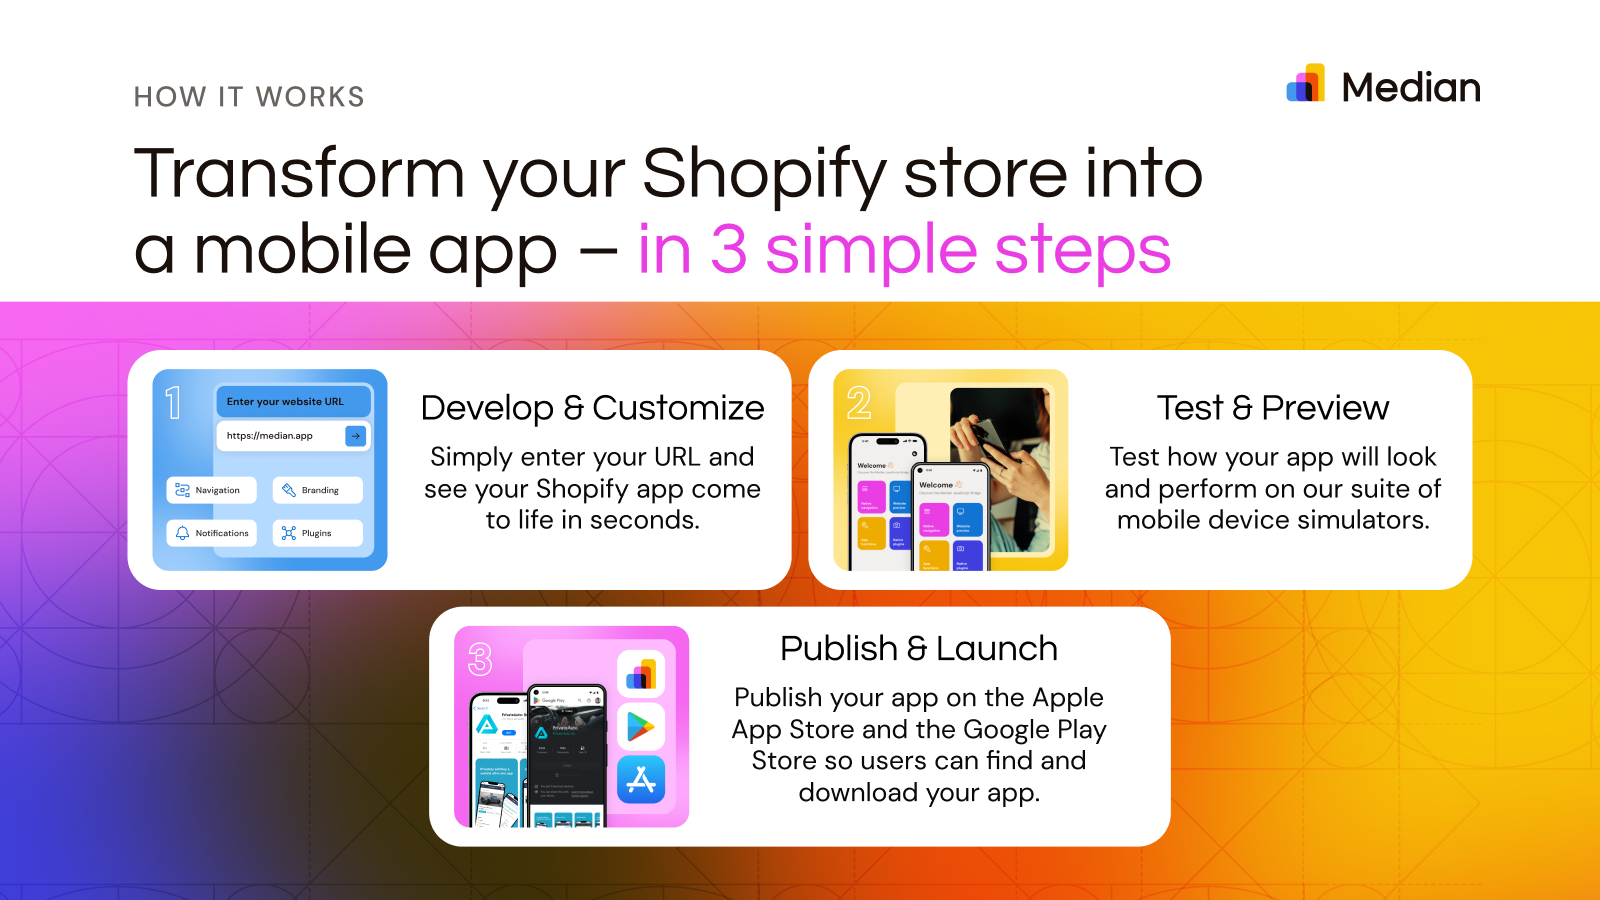 Transform your Shopify store into a mobile app in 3 simple steps